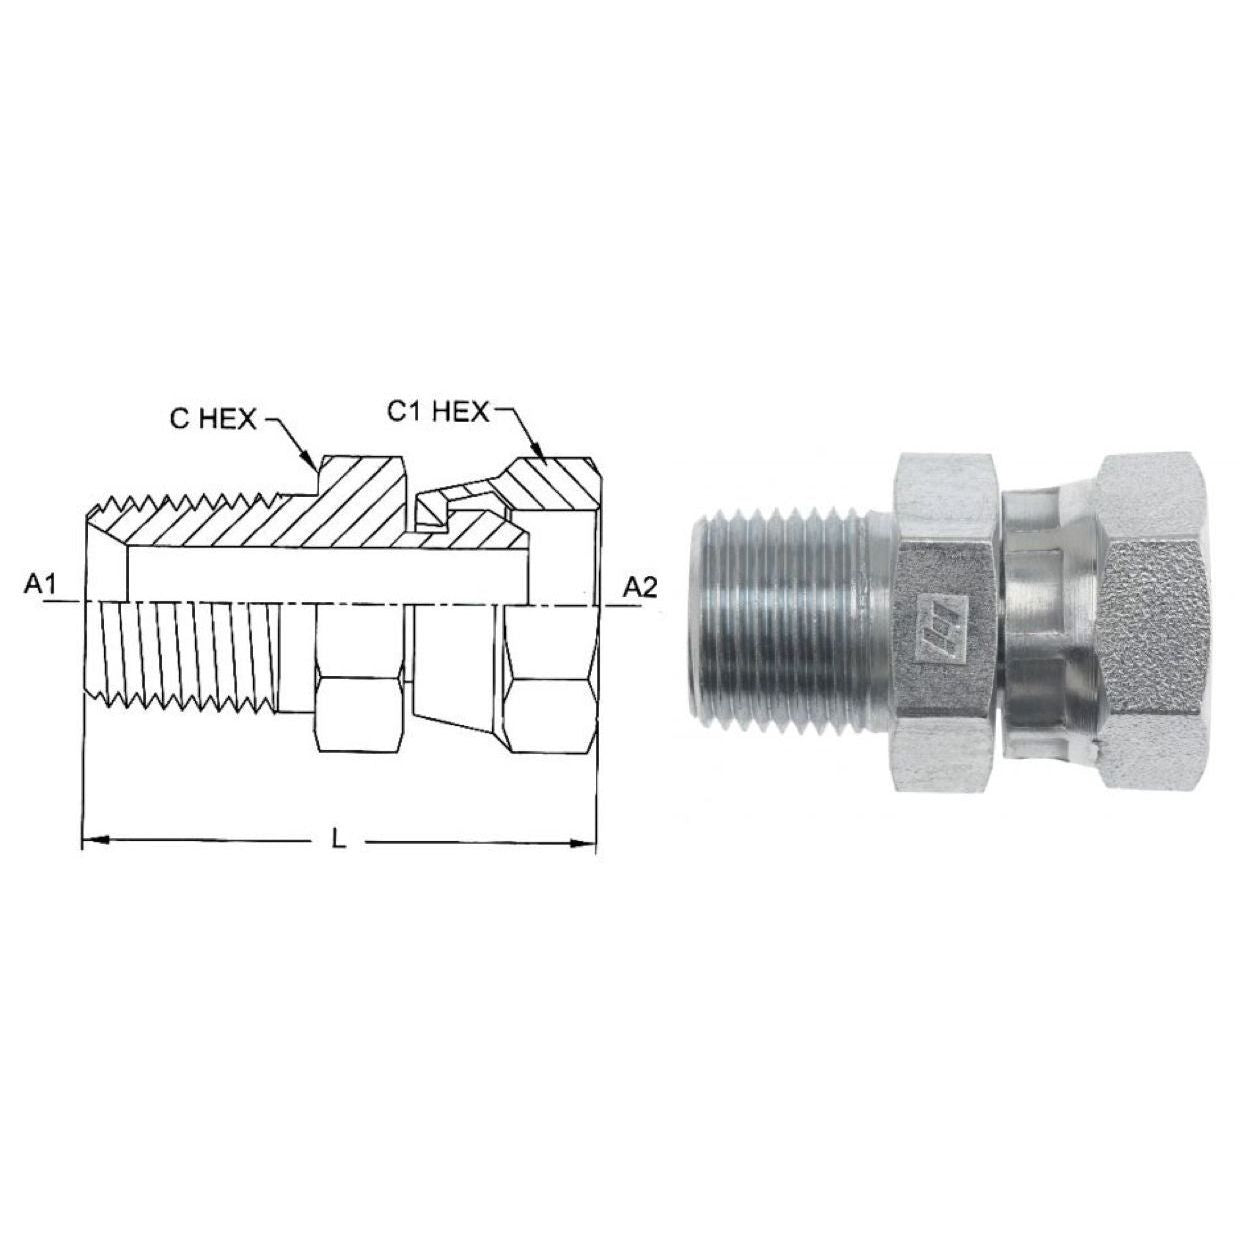 1404-06-06-SS : OneHydraulics Straight Adapter, 0.375 (3/8) Male NPT x 0.375 (3/8) Female NPT Swivel, Stainless Steel, 4800psi